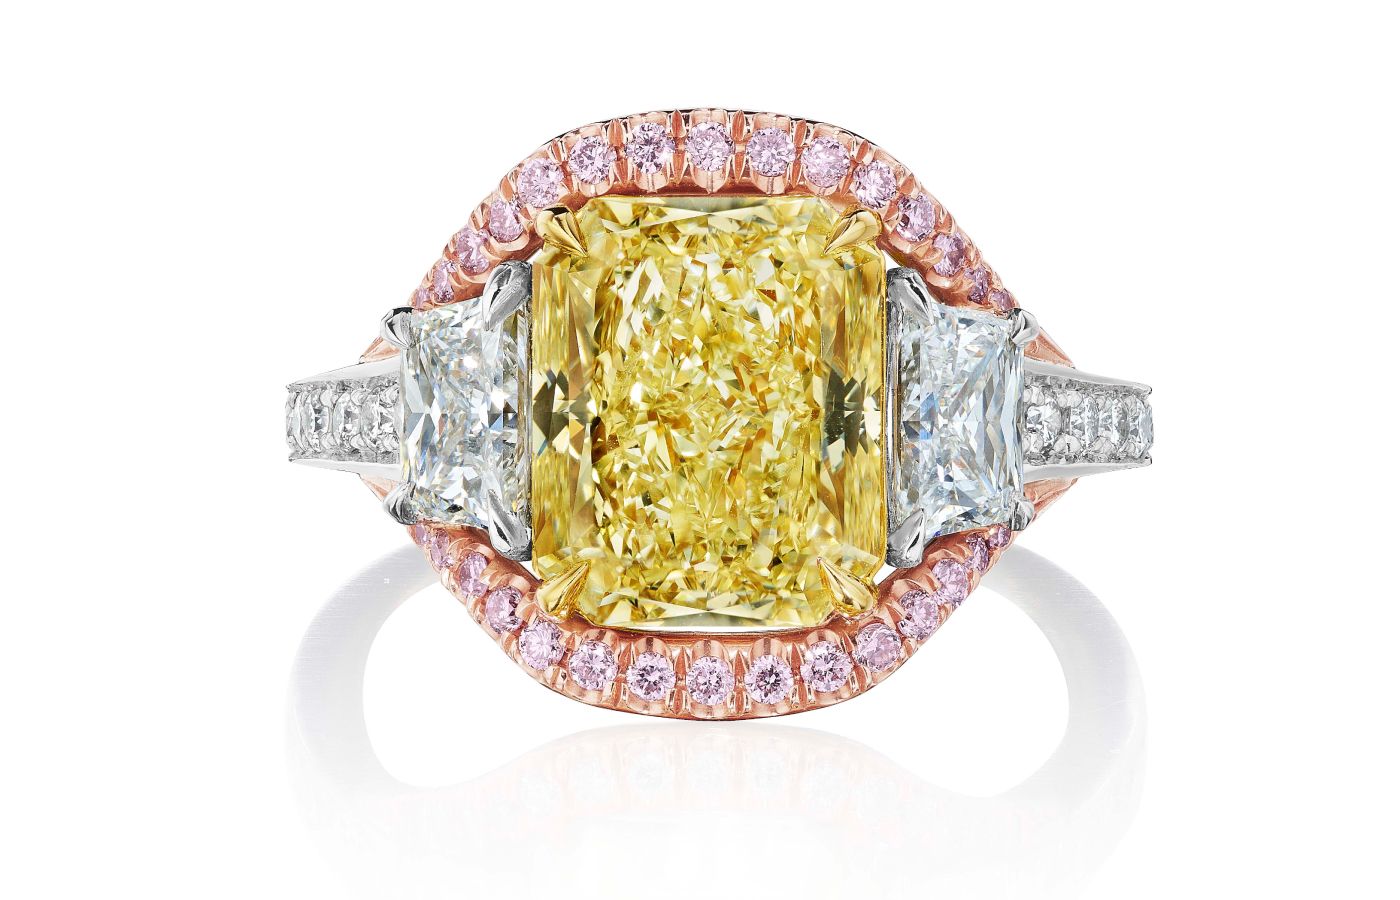 A unique white, yellow and pink diamond engagement ring design by ARAZI